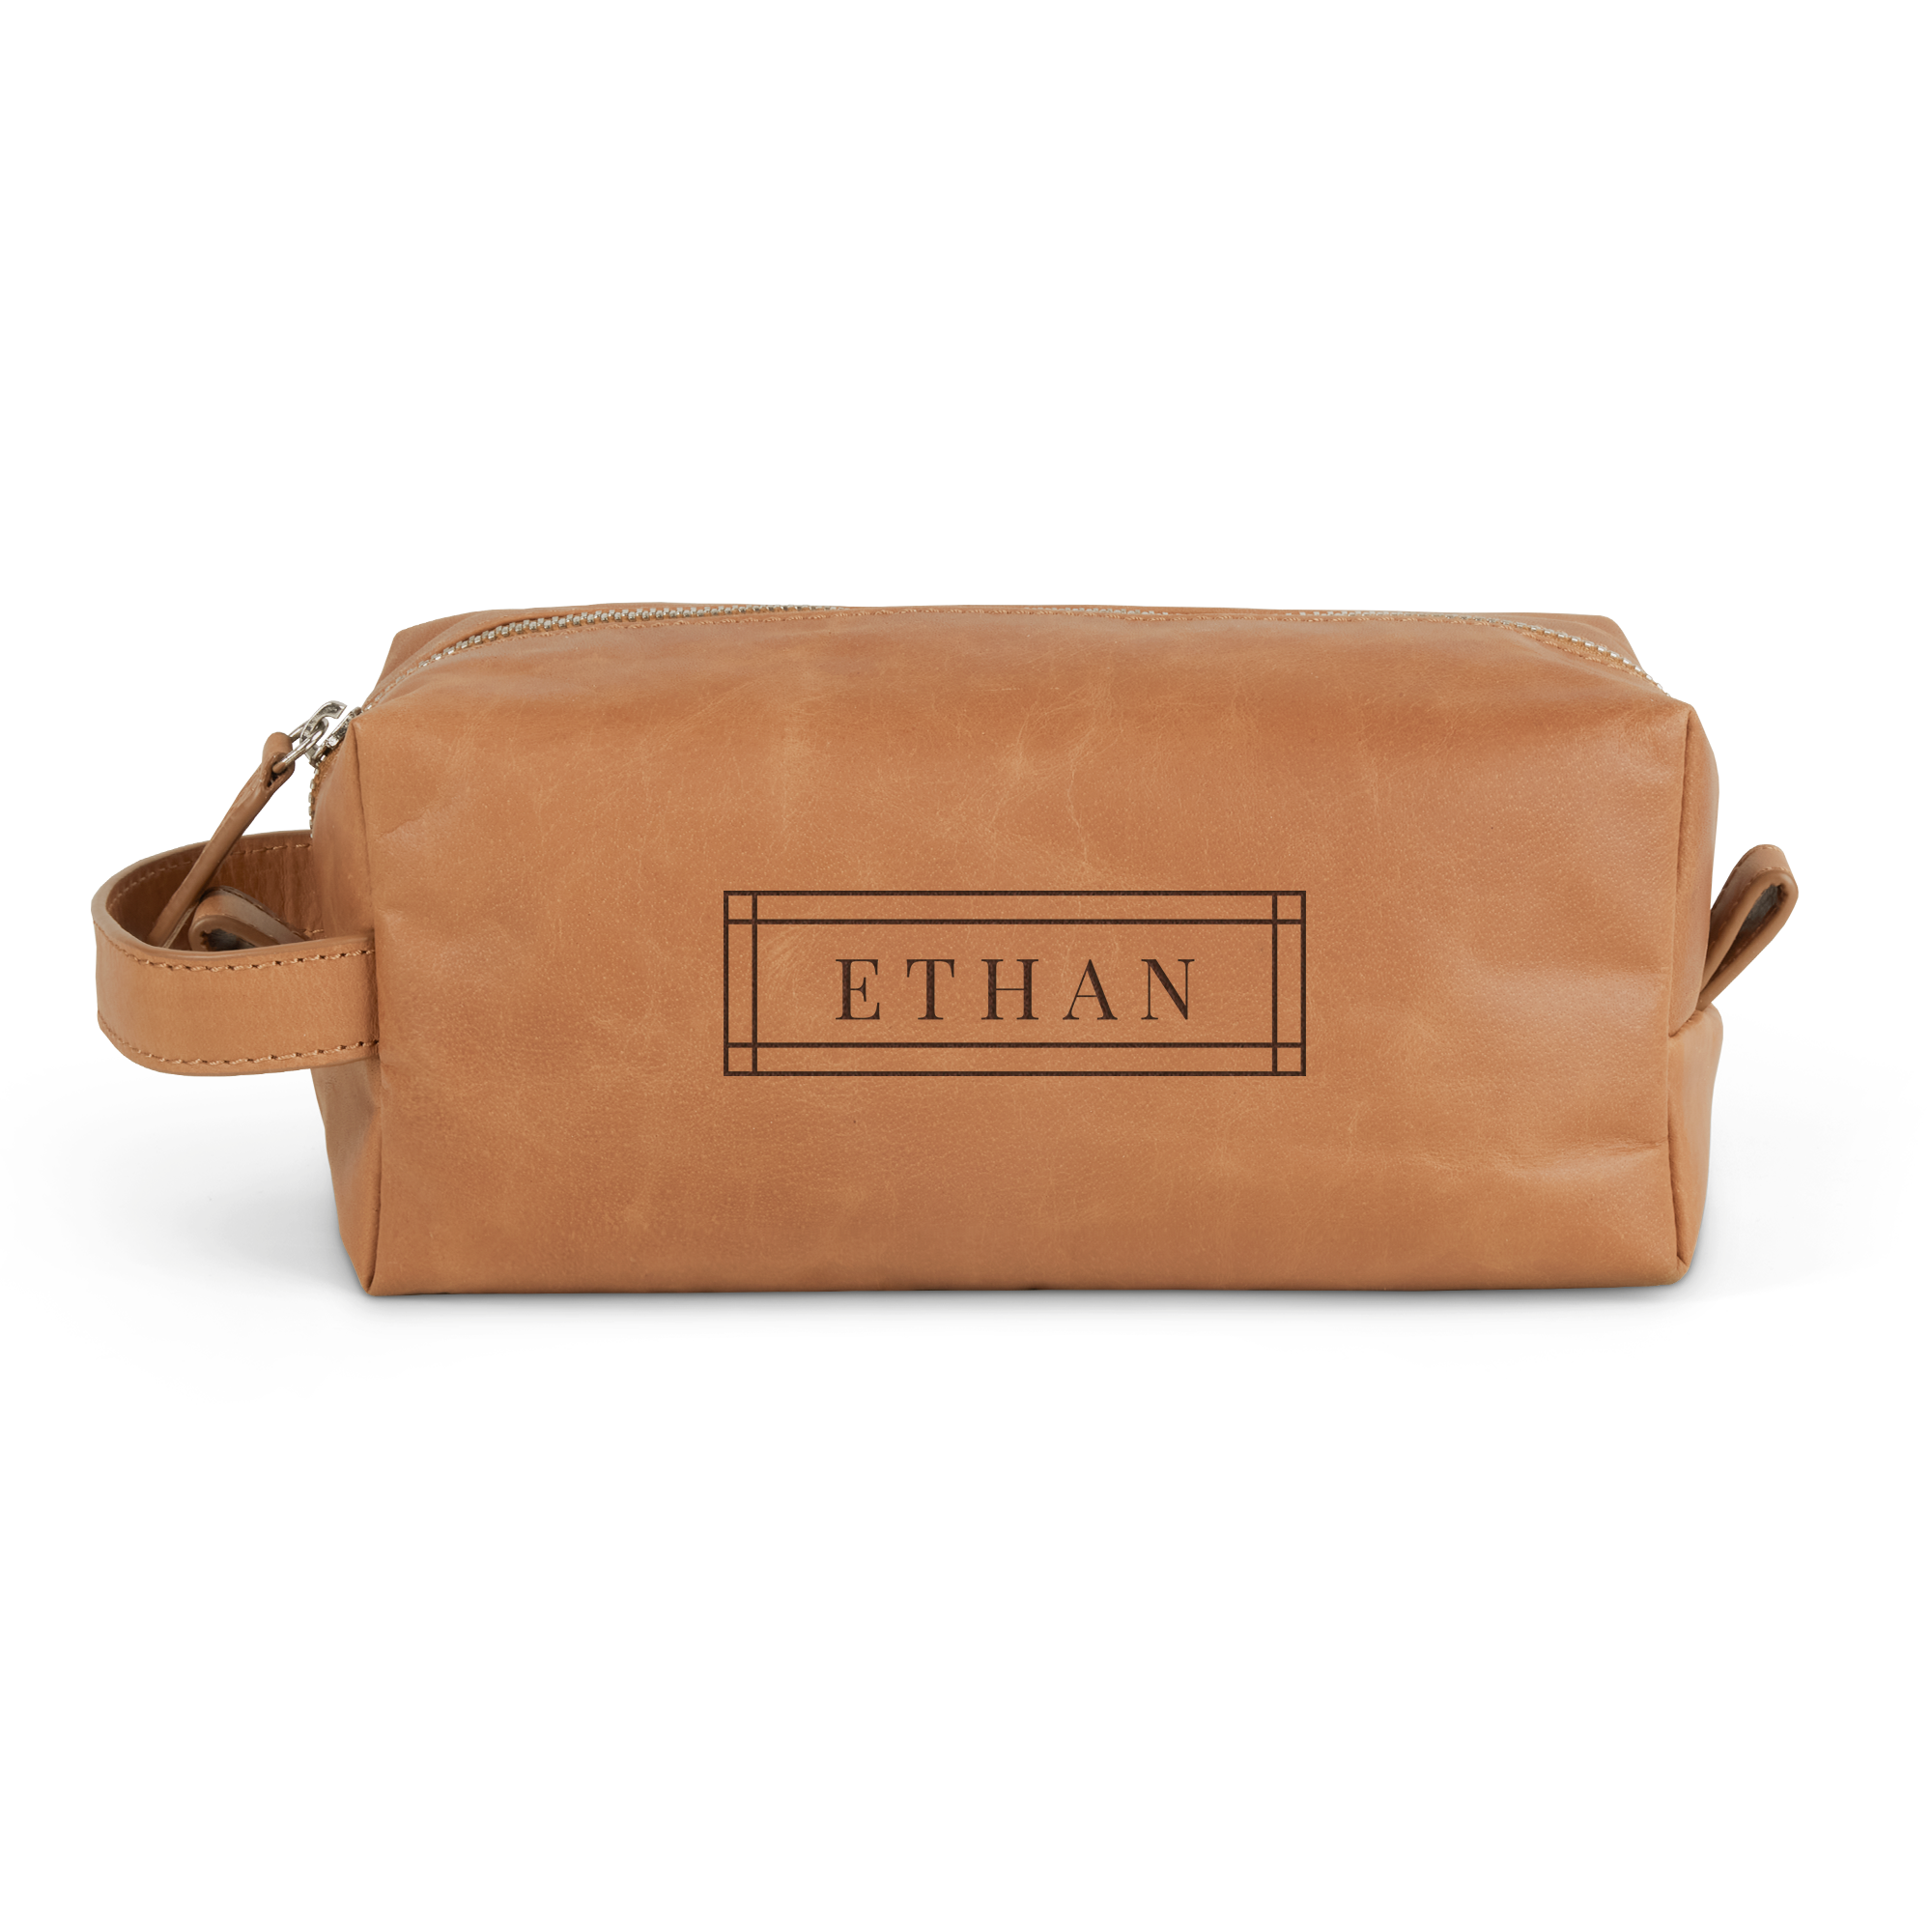 Personalised leather toiletry bag - Brown - Engraved